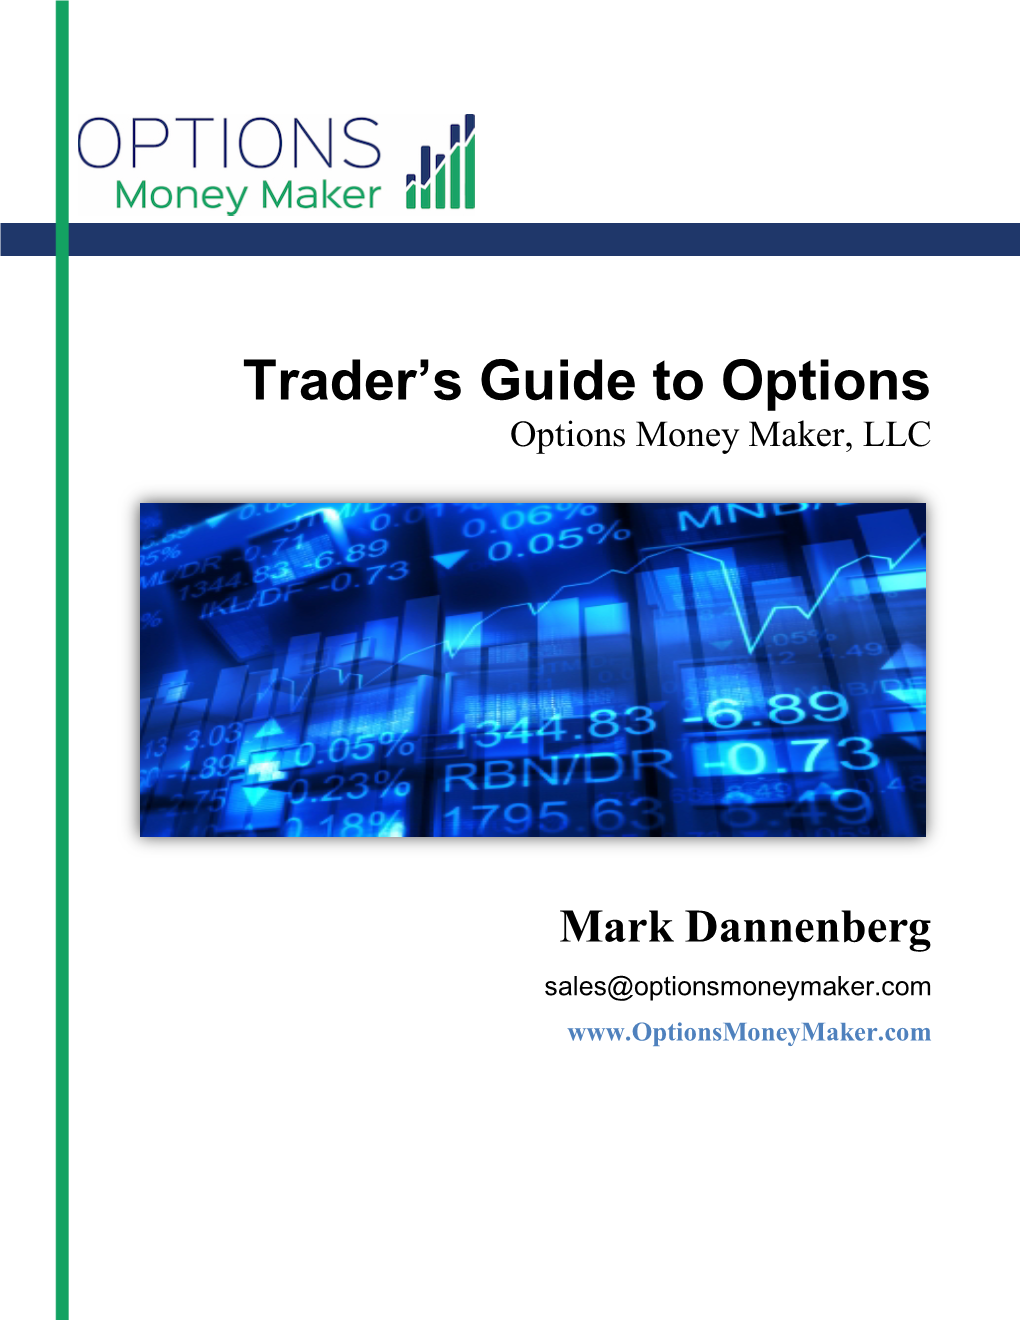 Traders Guide to Options-2018